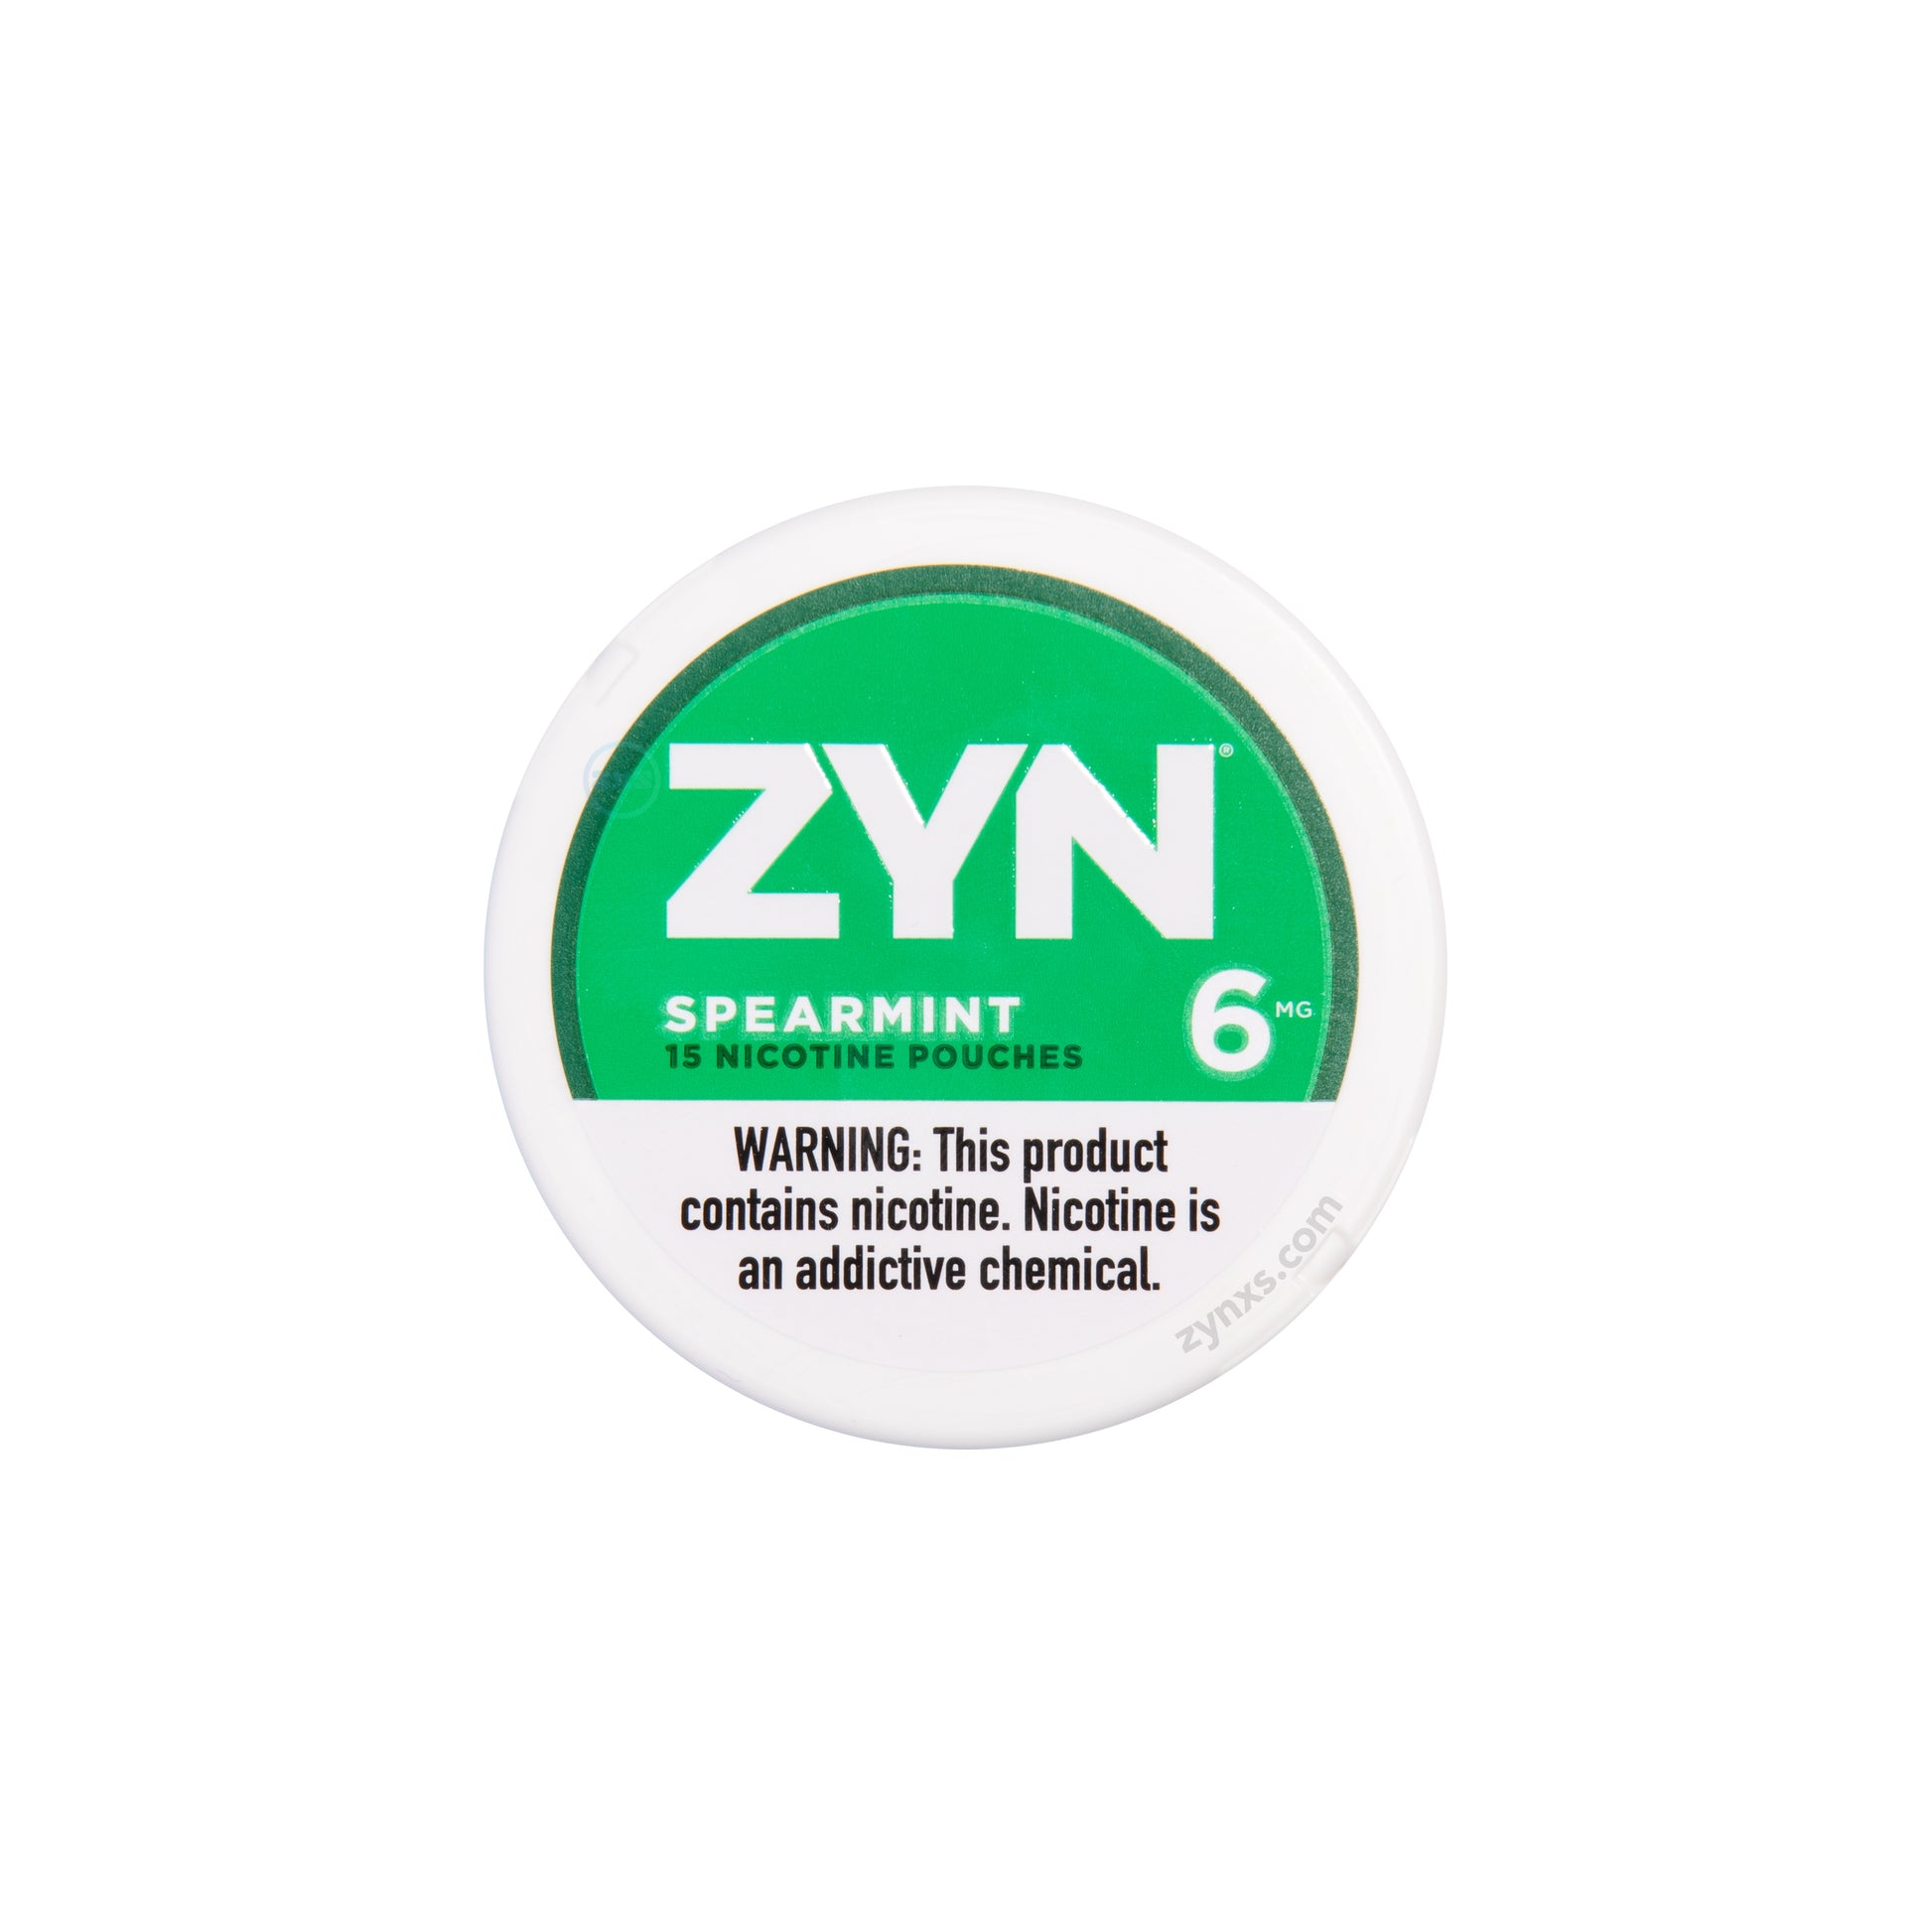 Zyn Spearmint 6 MG nicotine pouches packaging. The package showcases a green and white color scheme, representing the spearmint flavor